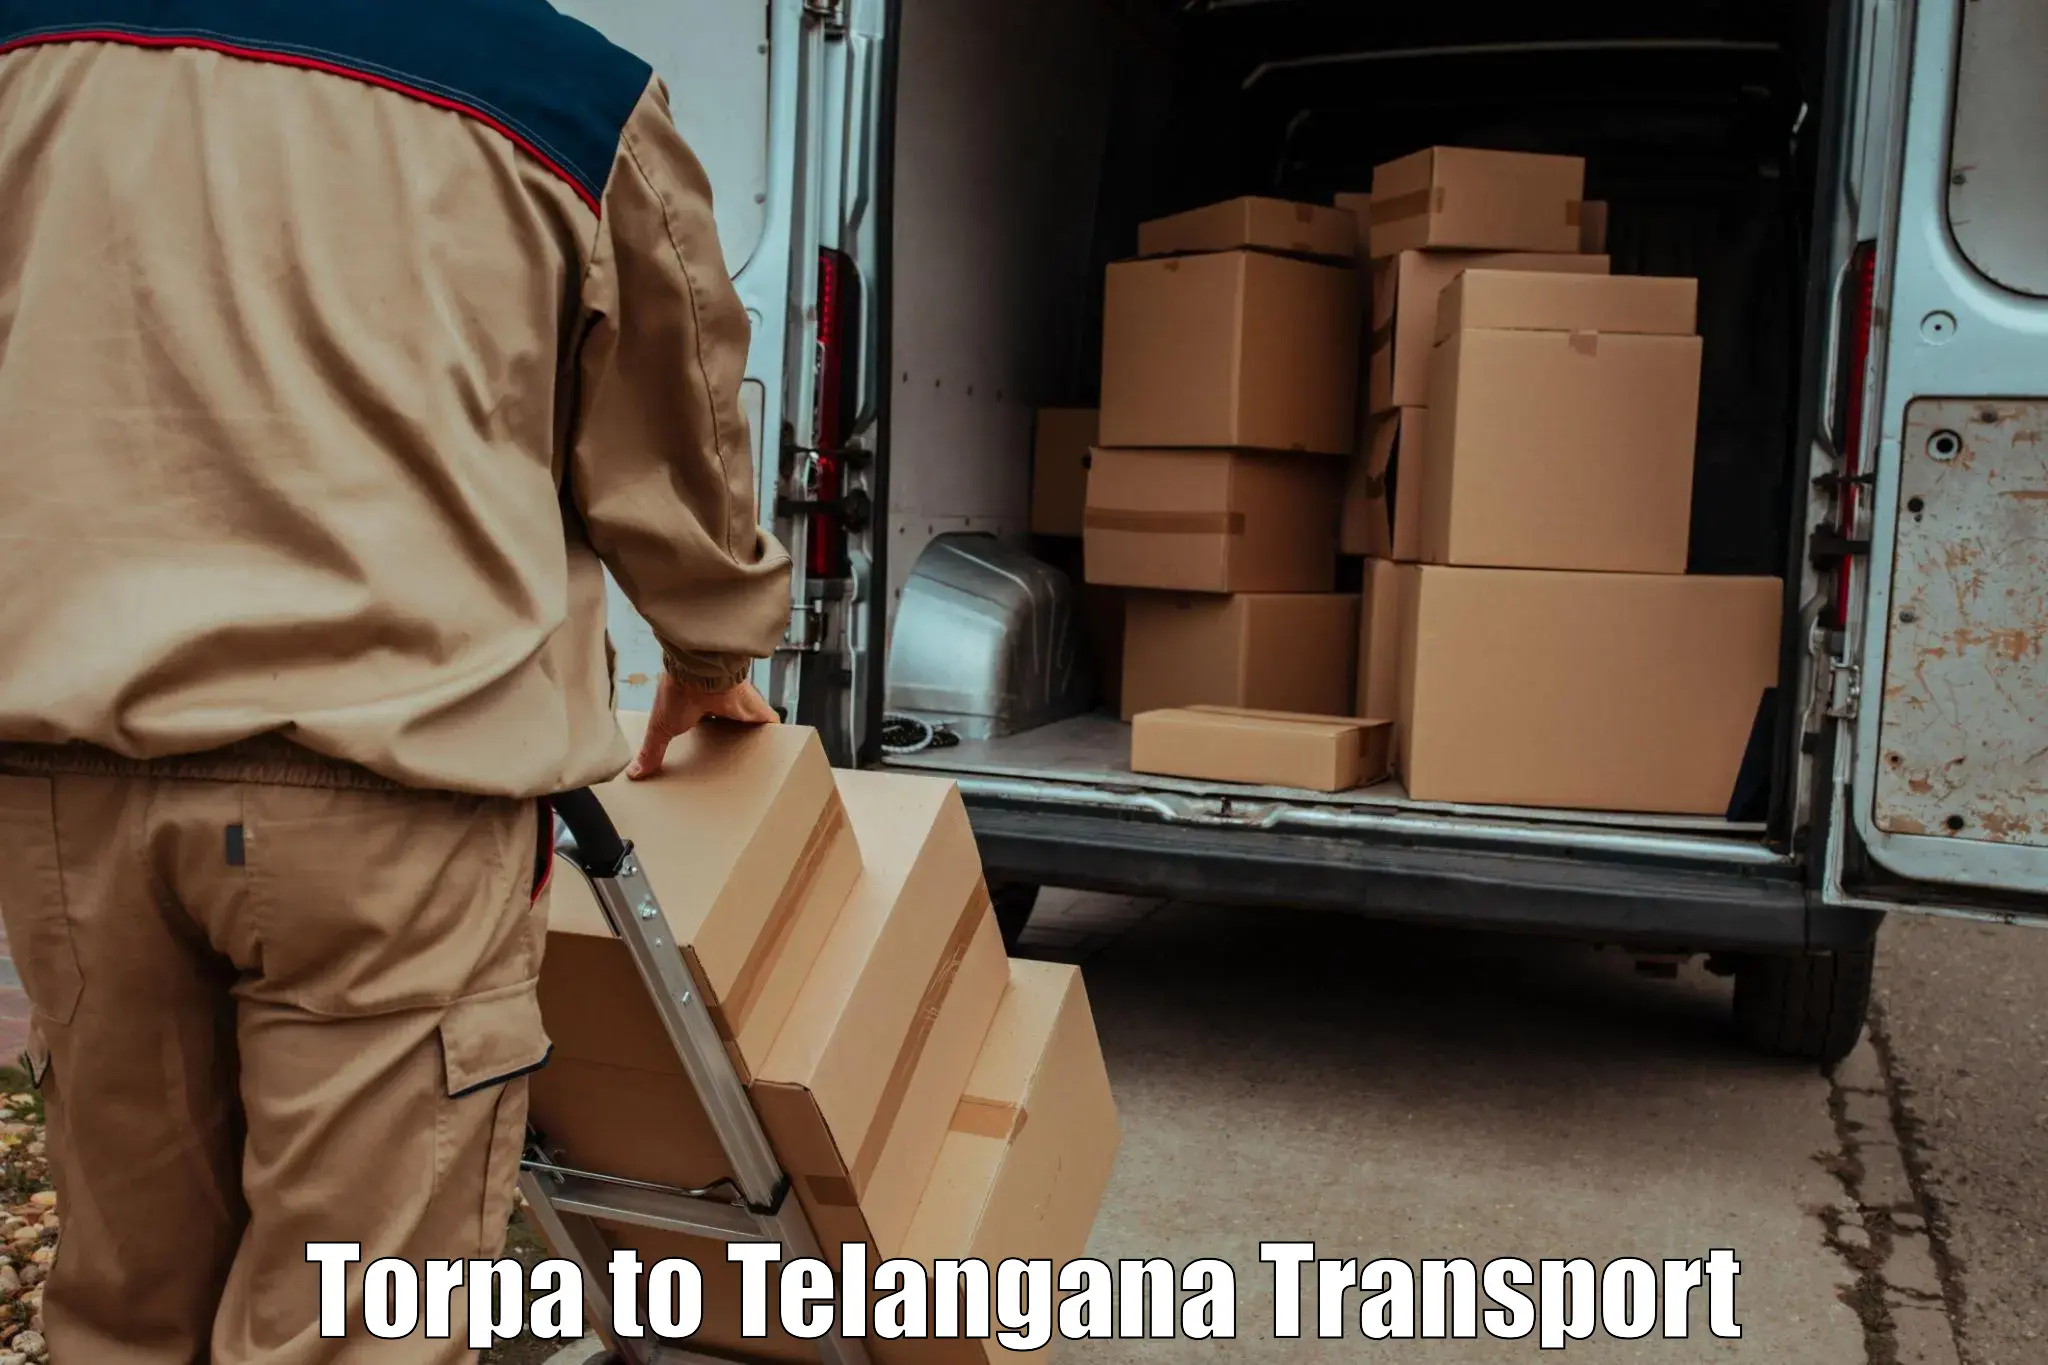 Transport bike from one state to another Torpa to Telangana